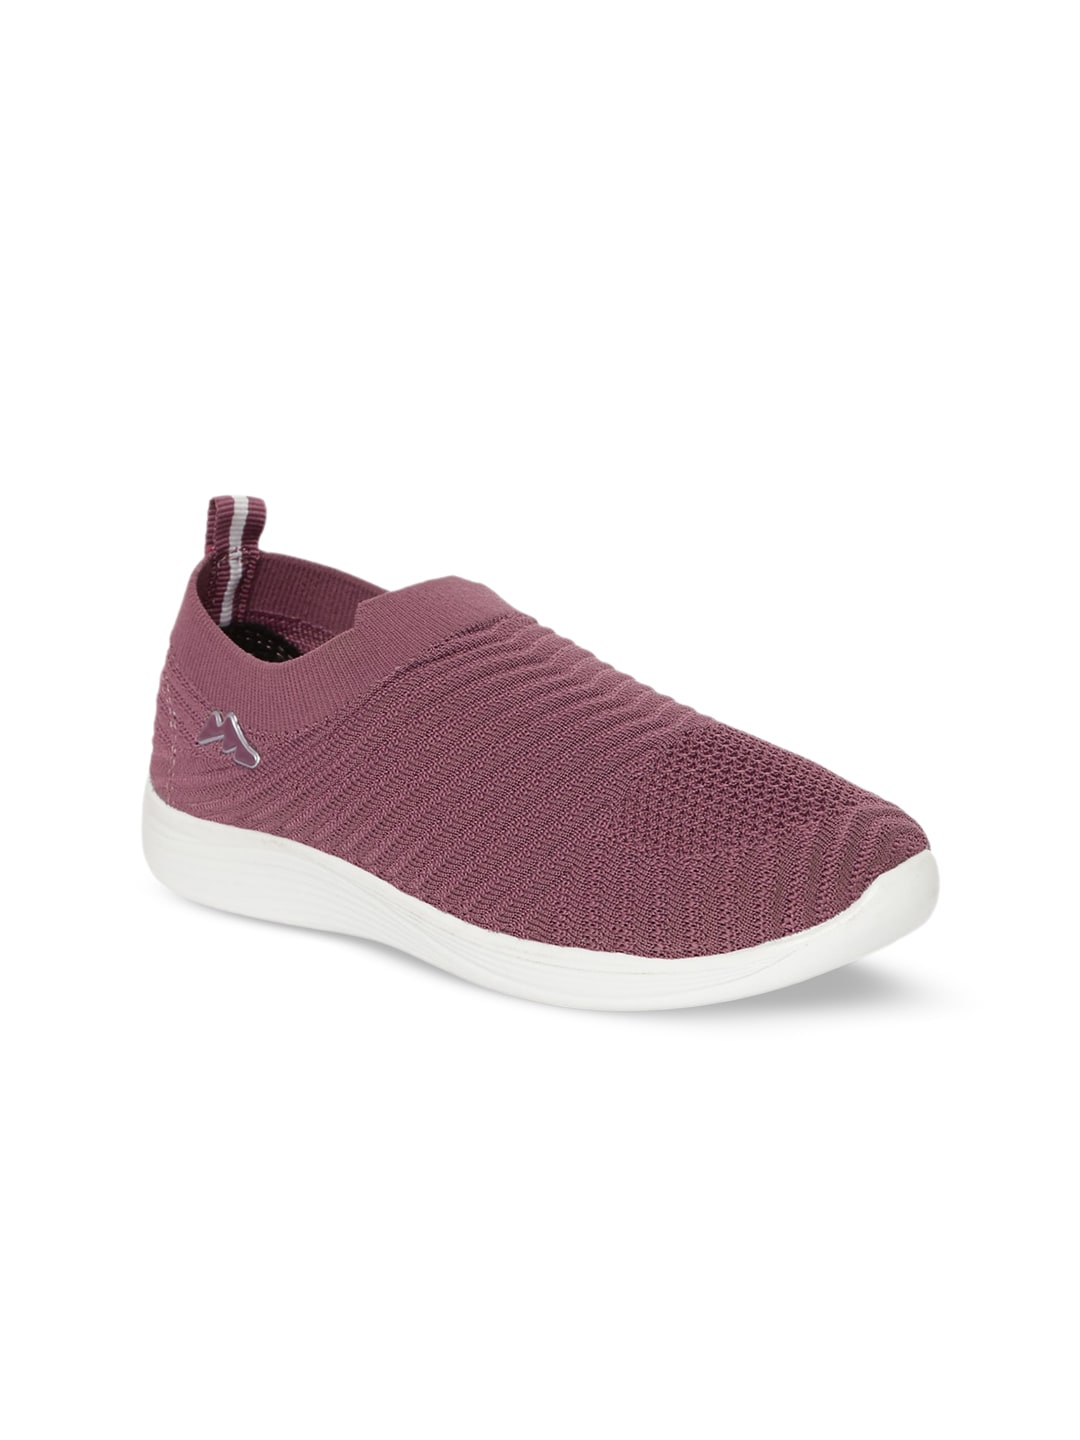 Paragon Women Knitted Slip-On Sneakers Price in India